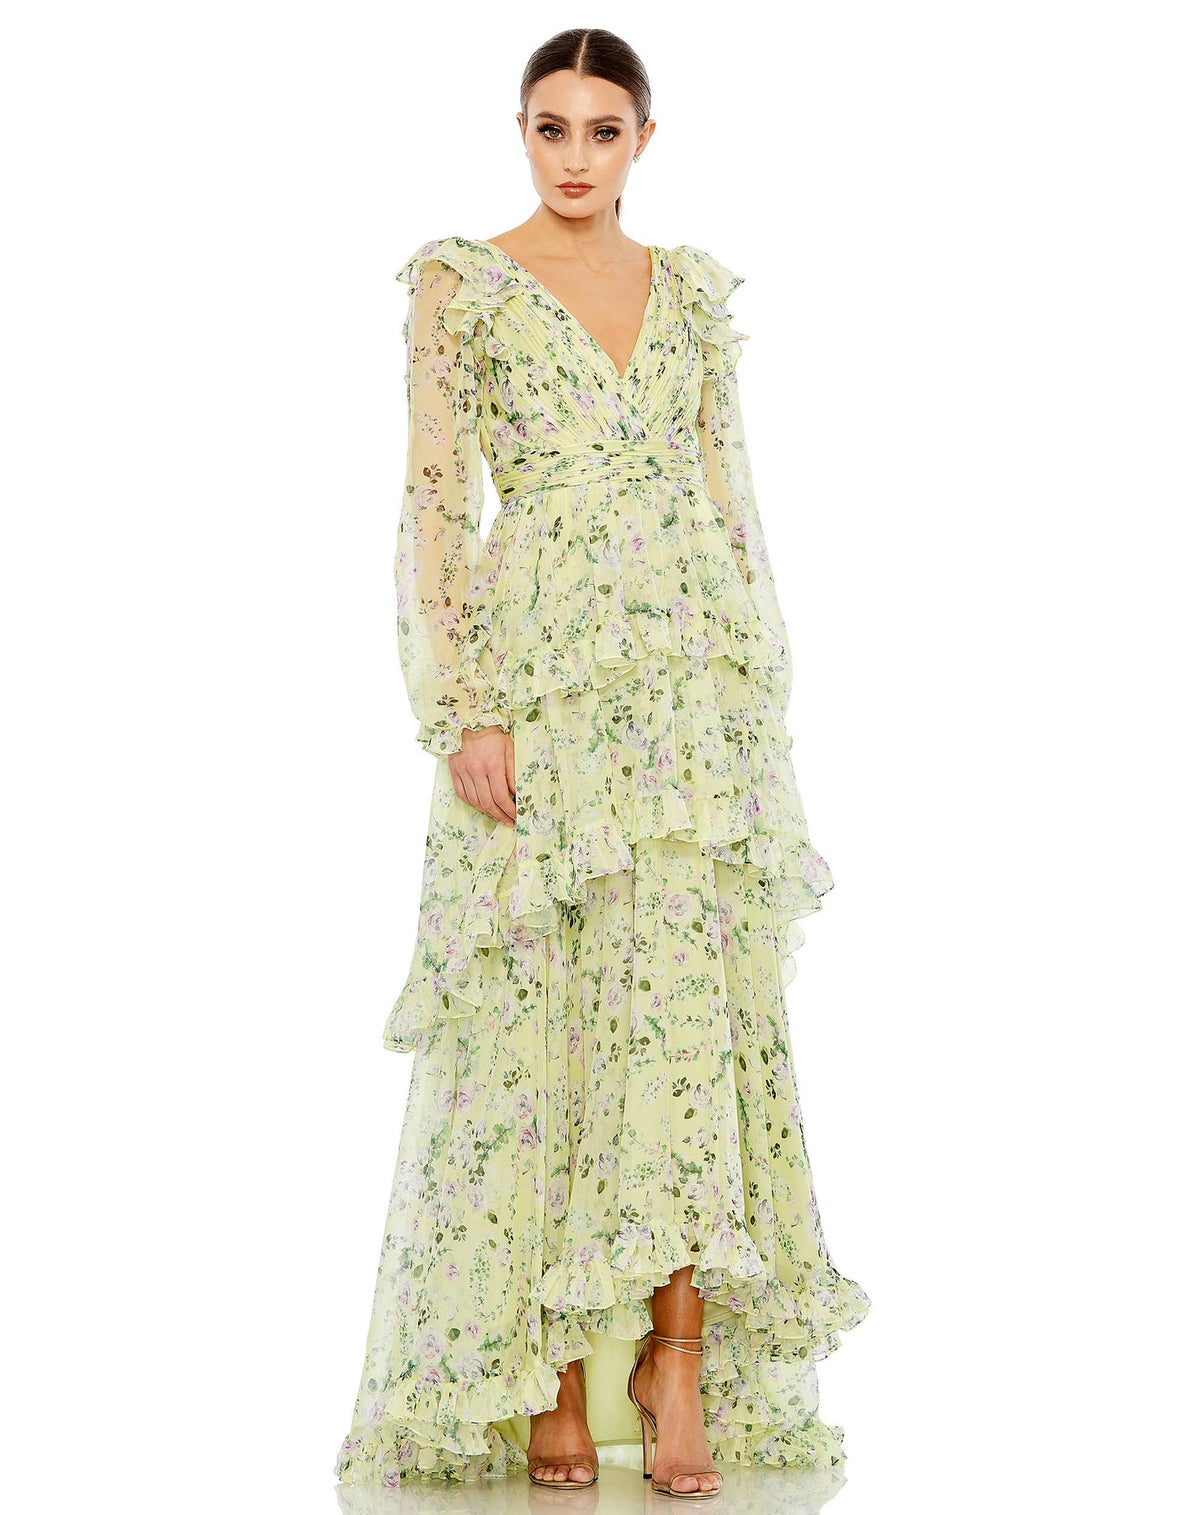 MAC DUGGAL, FLORAL CHIFFON TIERED RUFFLE PUFF SLEEVE GOWN, Style #68220, KEY LIME